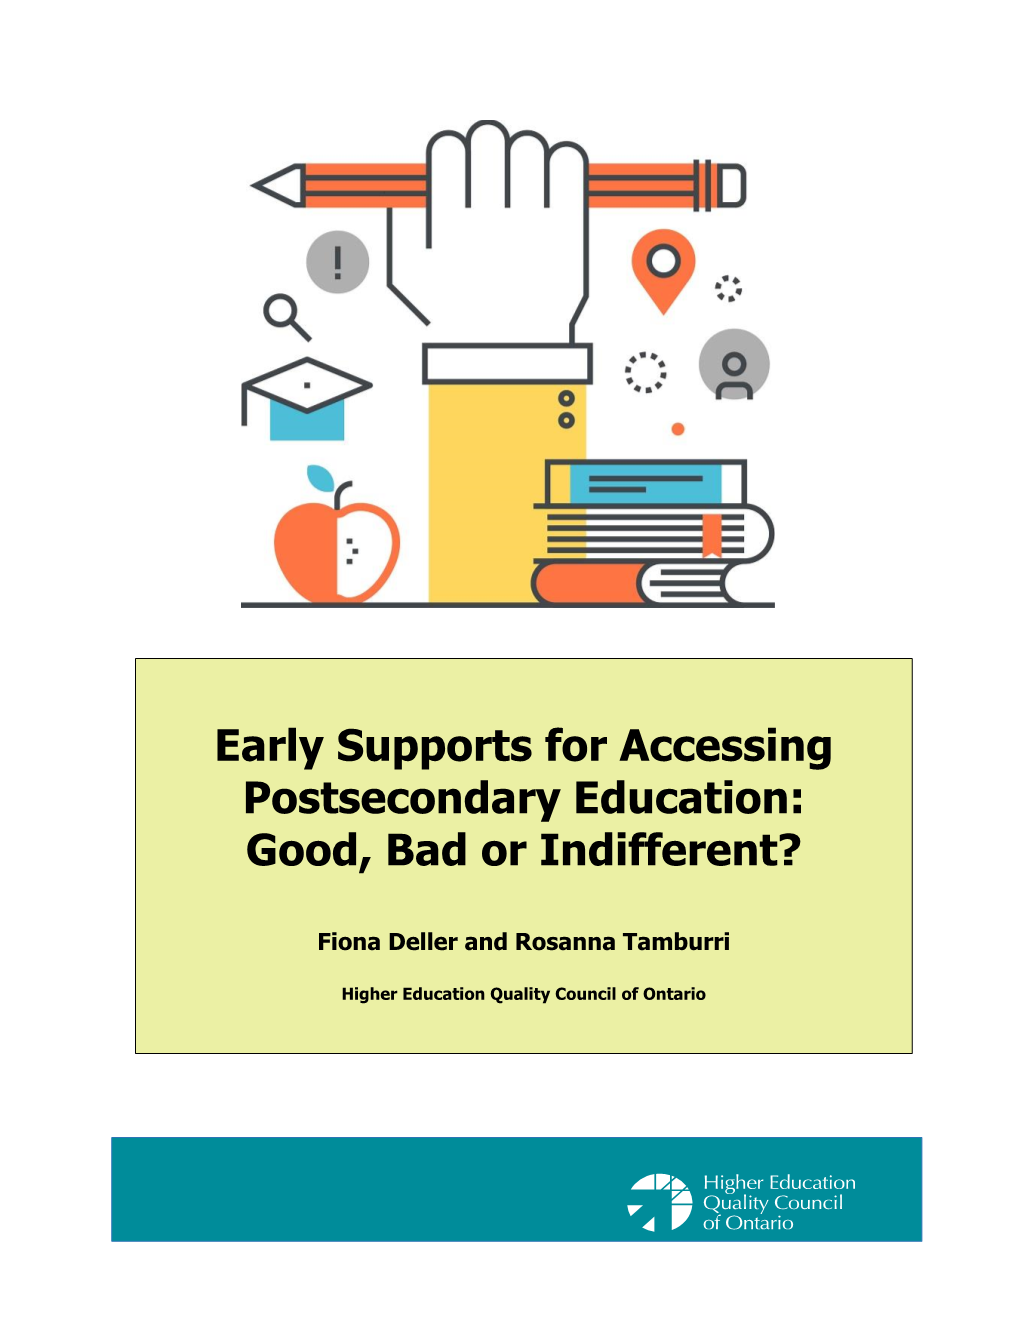 Early Supports for Accessing Postsecondary Education: Good, Bad Or Indifferent?